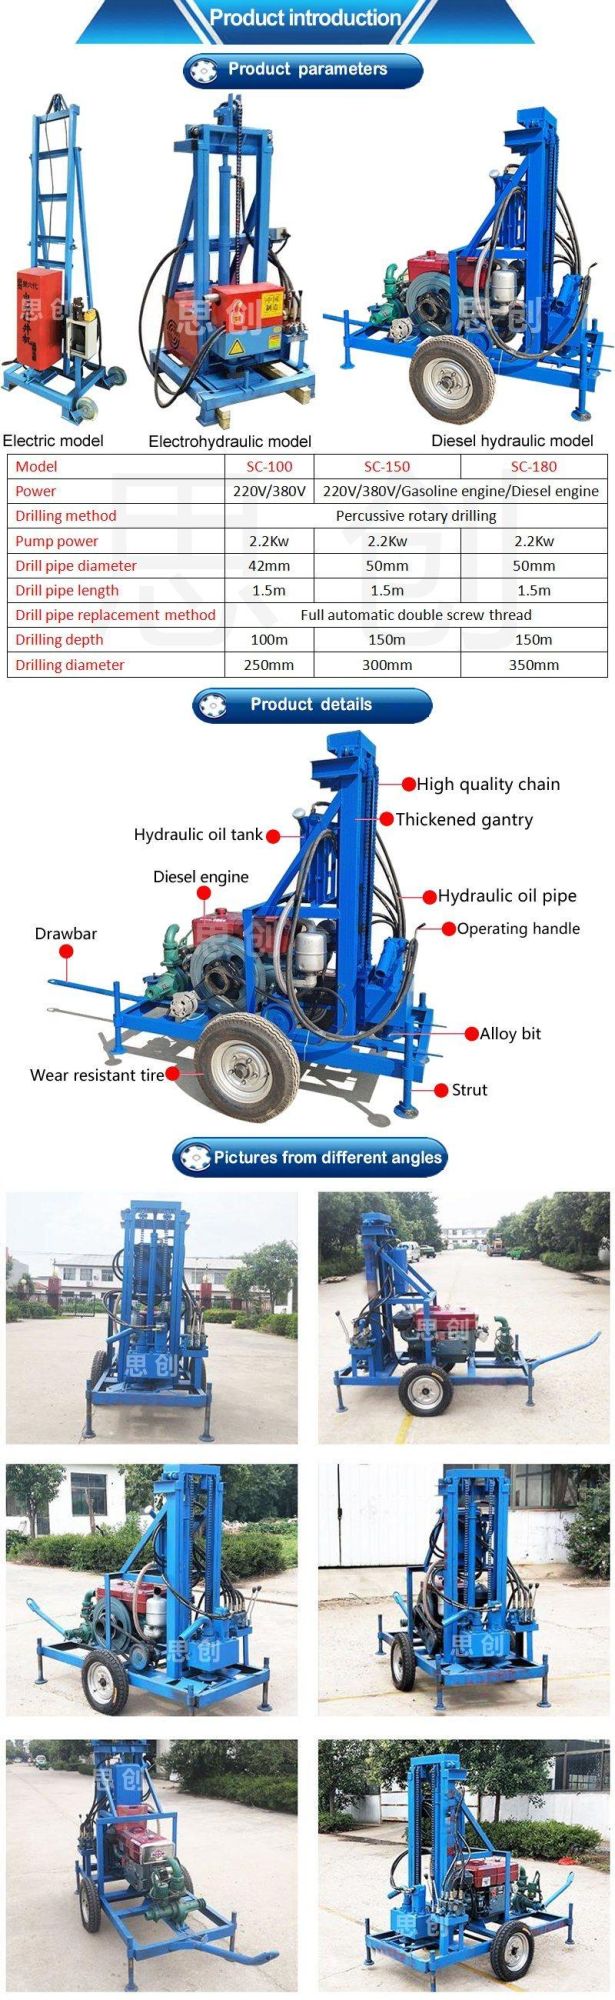 Commercial 100m portable Borehole Water Well Drilling Rig Machine